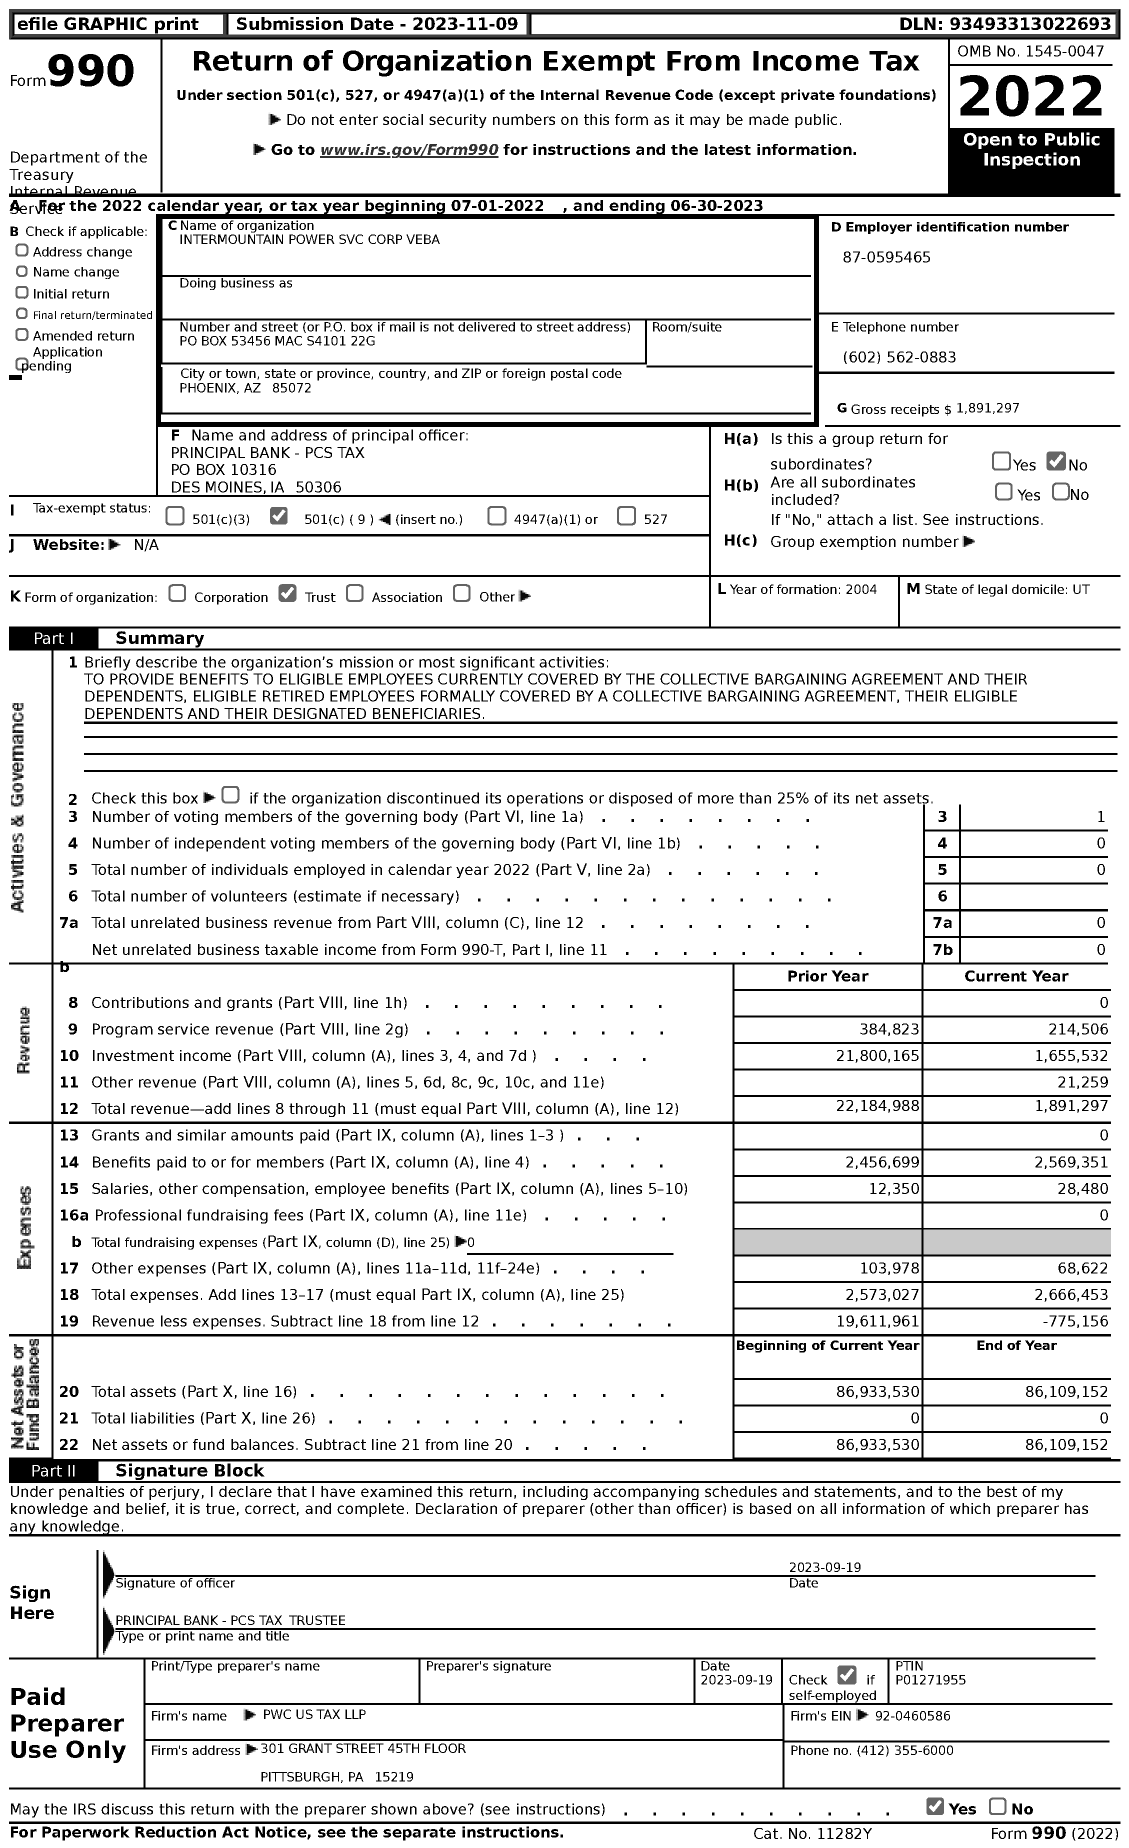 Image of first page of 2022 Form 990 for Intermountain Power Service Corp Veba